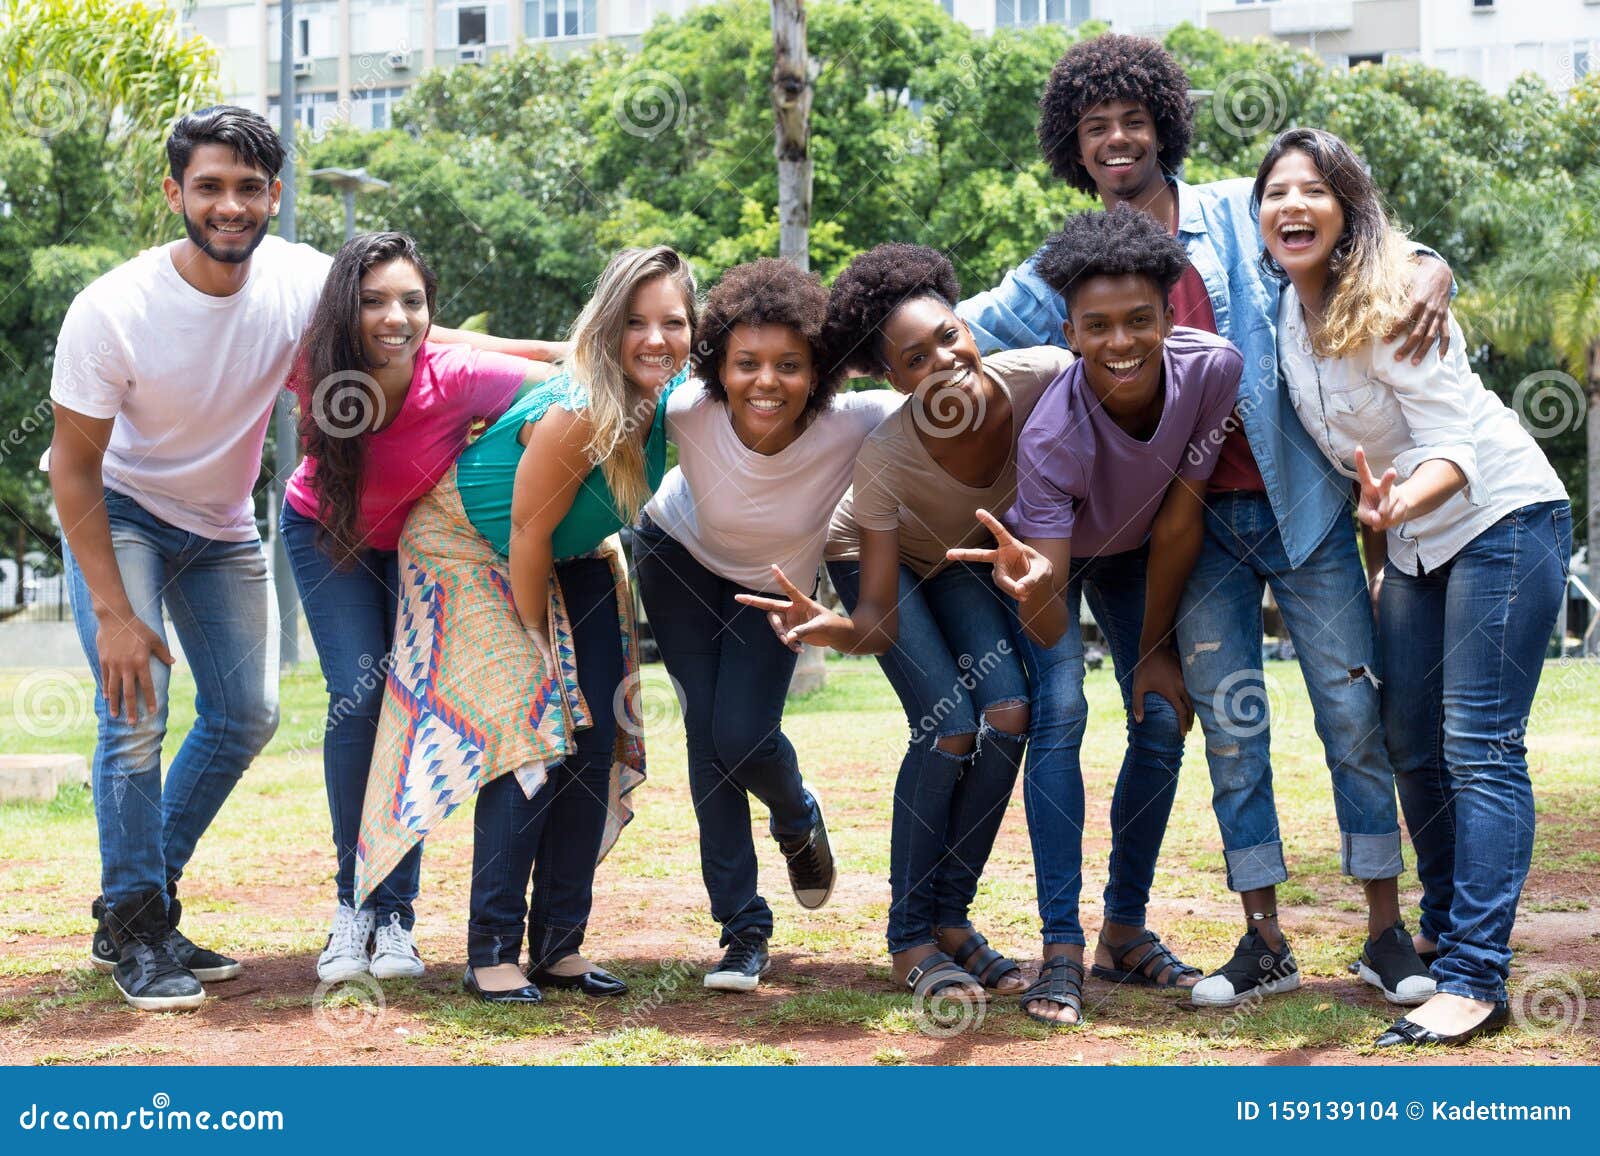 large group of happy laughing international young adults